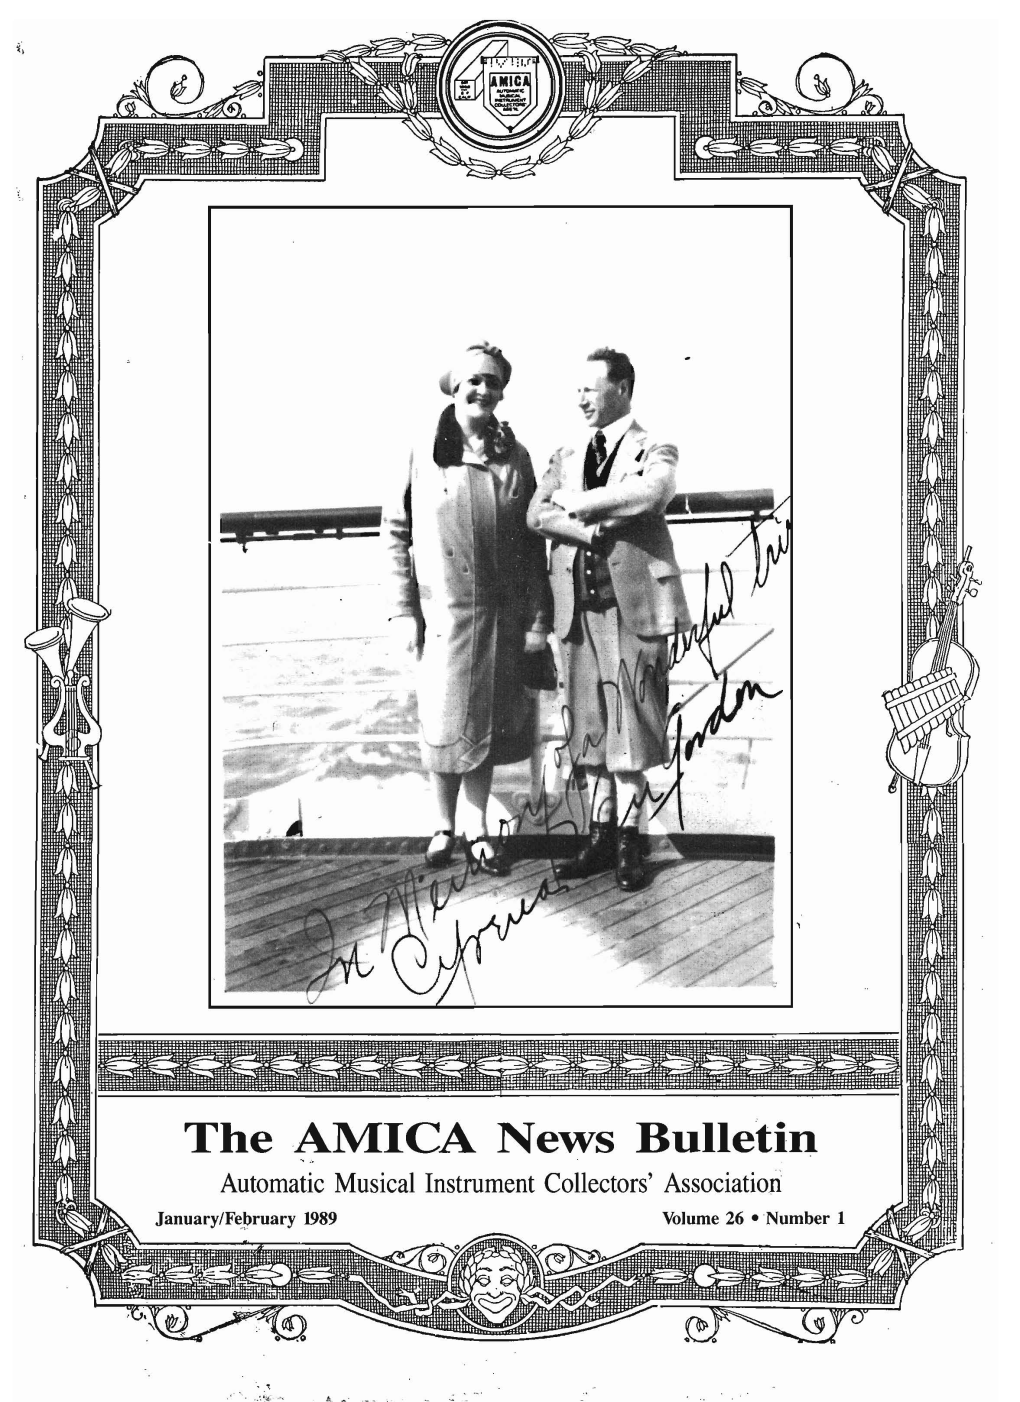 The AMICA News Bulletin Automatic Musical Instrument Collectors' Association